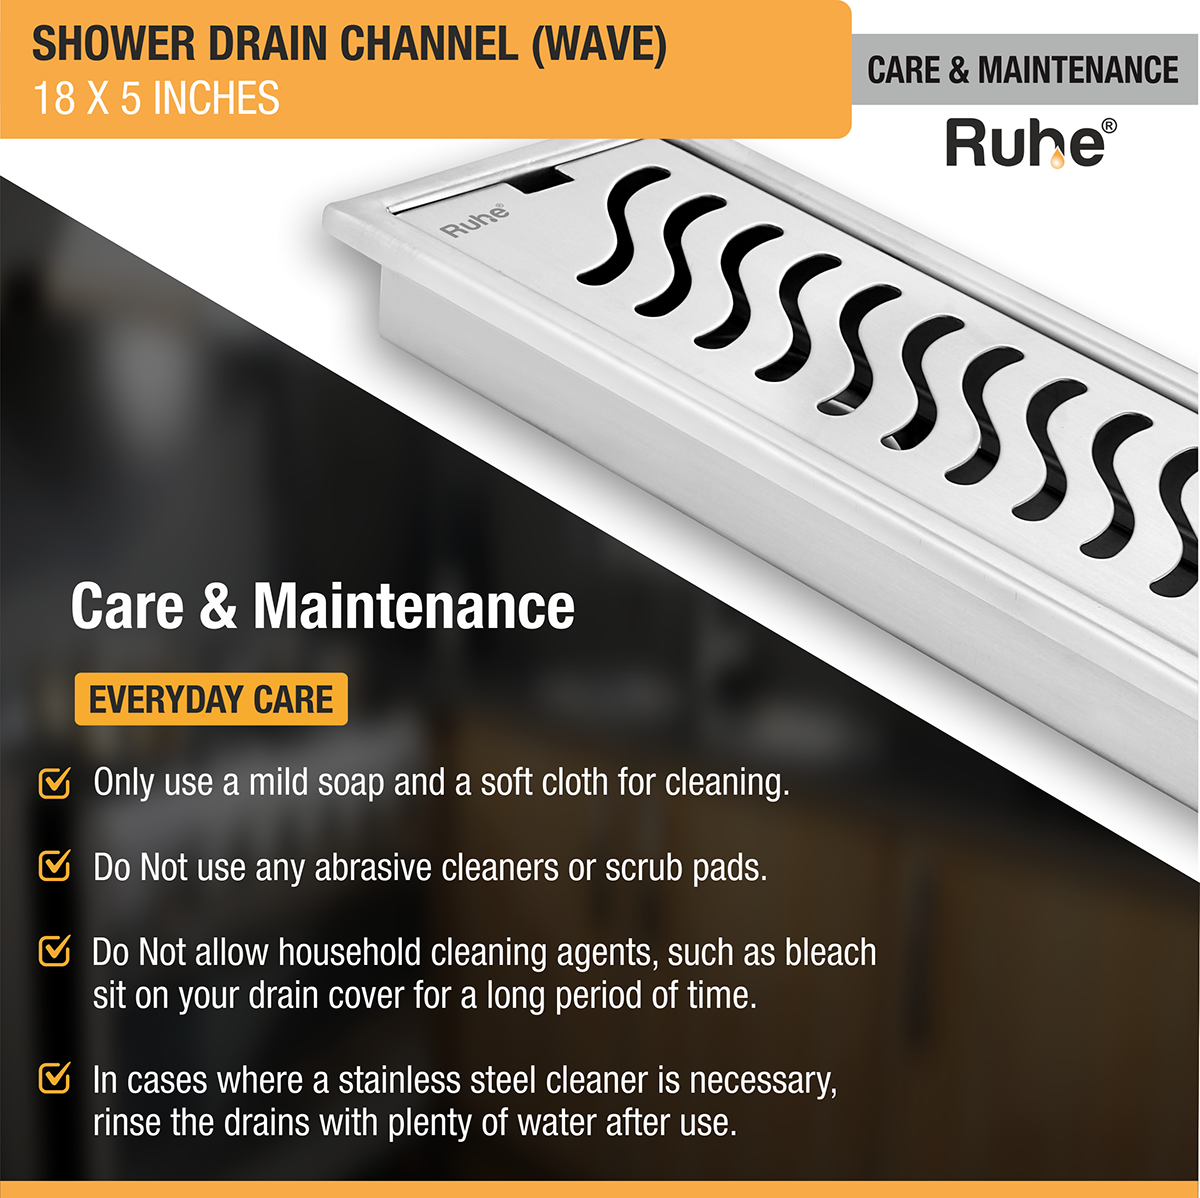 Wave Shower Drain Channel (18 X 5 Inches) with Cockroach Trap (304 Grade) care and maintenance